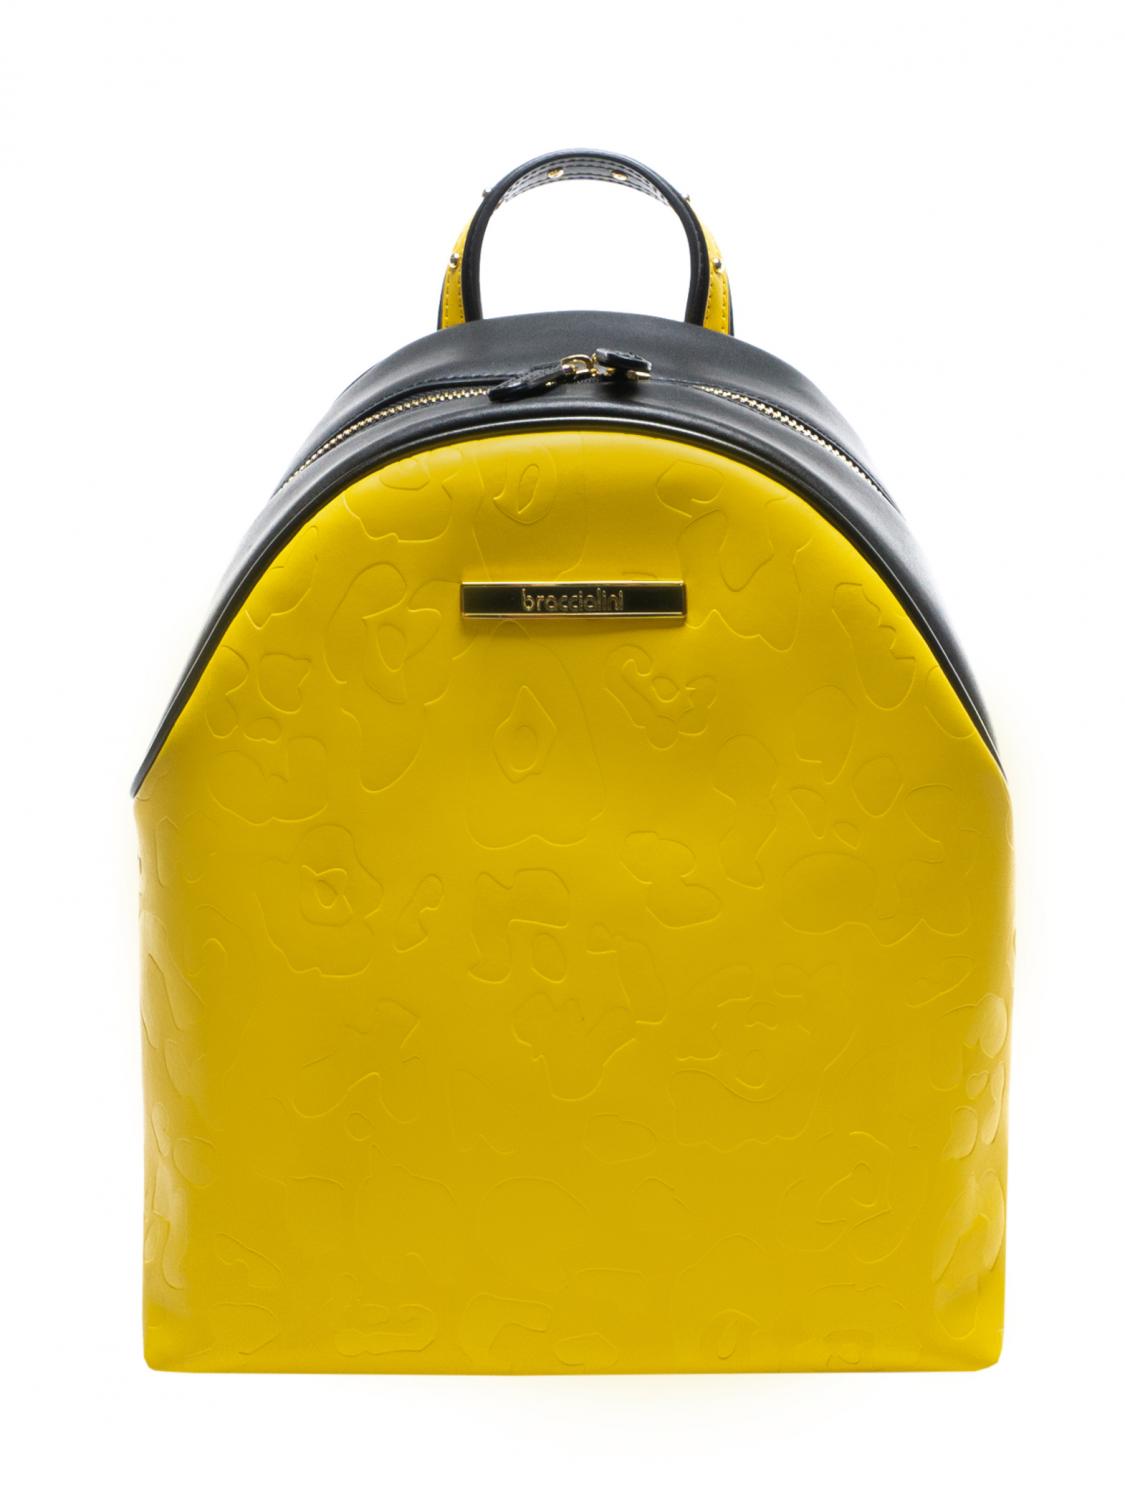 Braccialini Lola Leather Backpack Yellow - Buy At Outlet Prices!